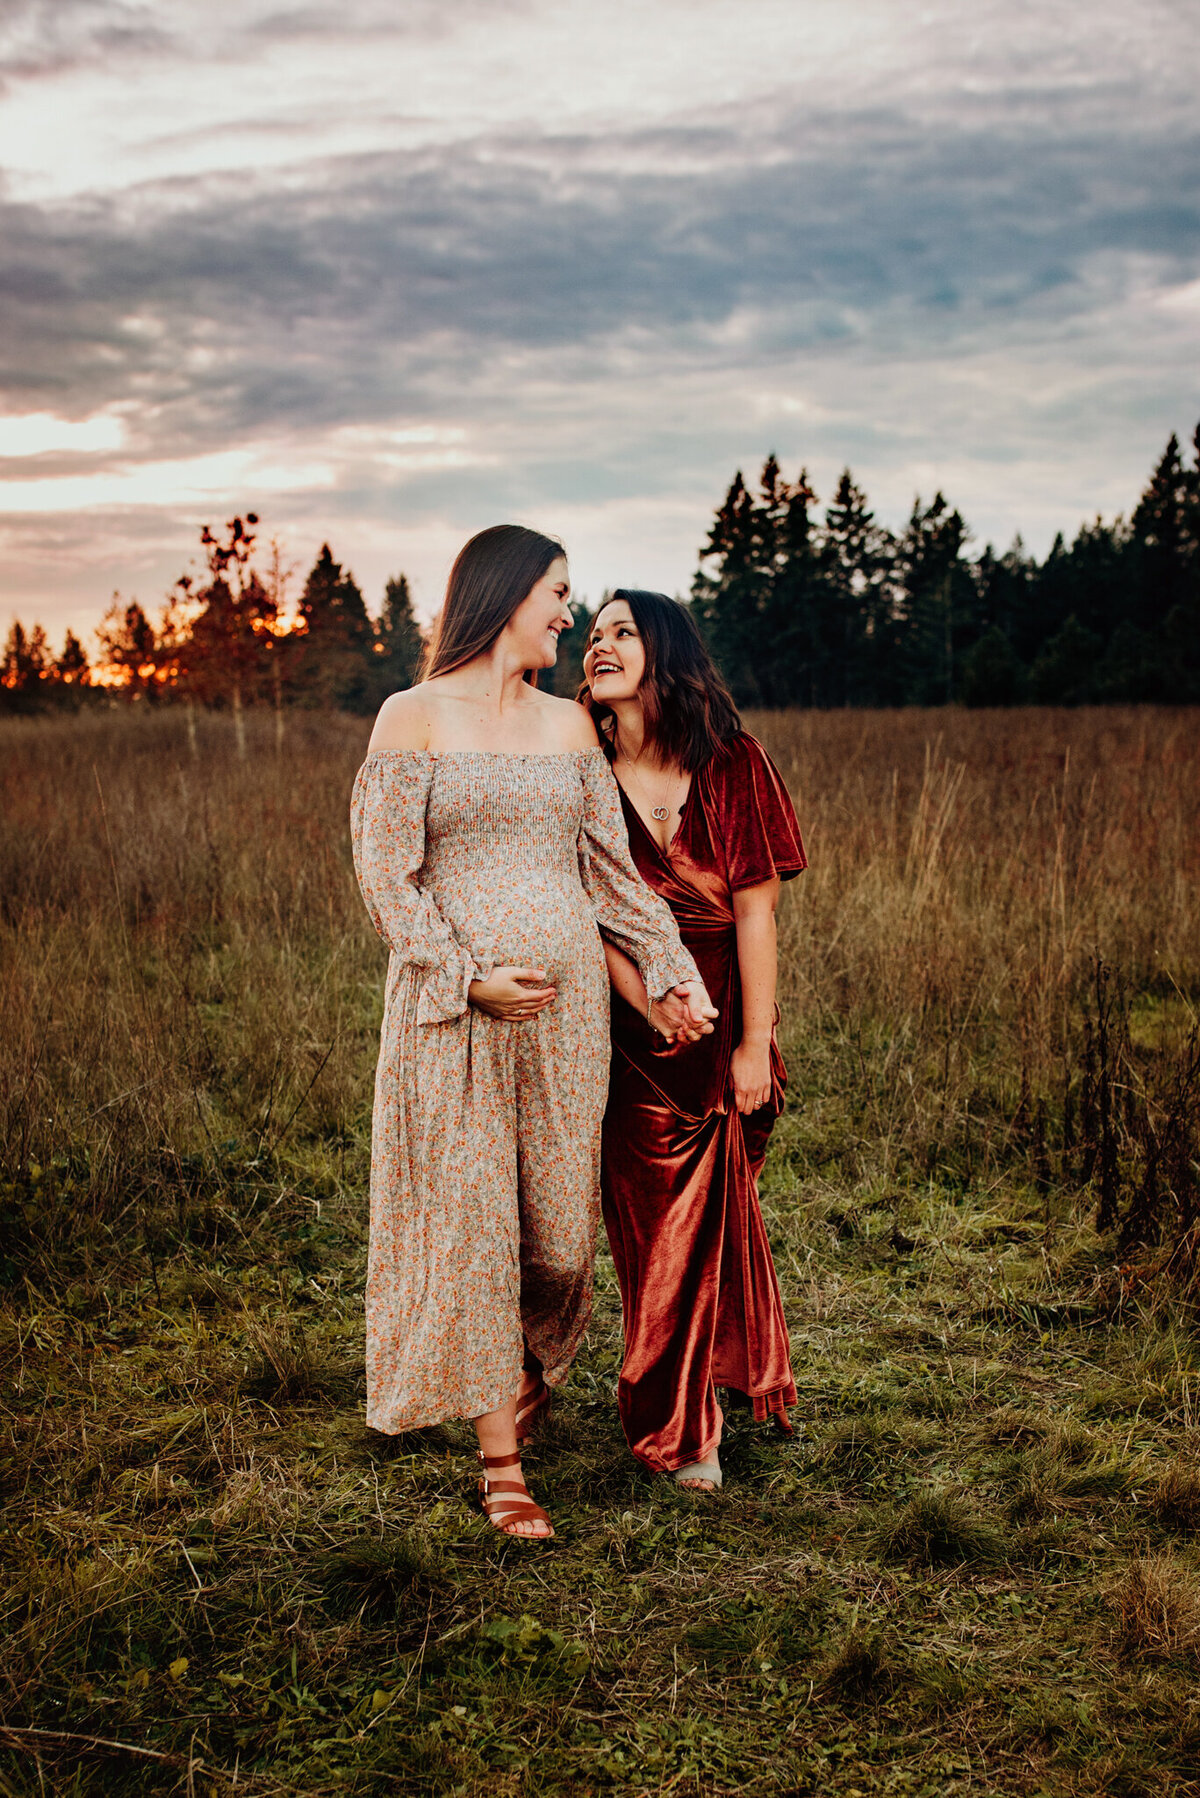 Two expectant moms walking hand in hand through a grassy Oregon field